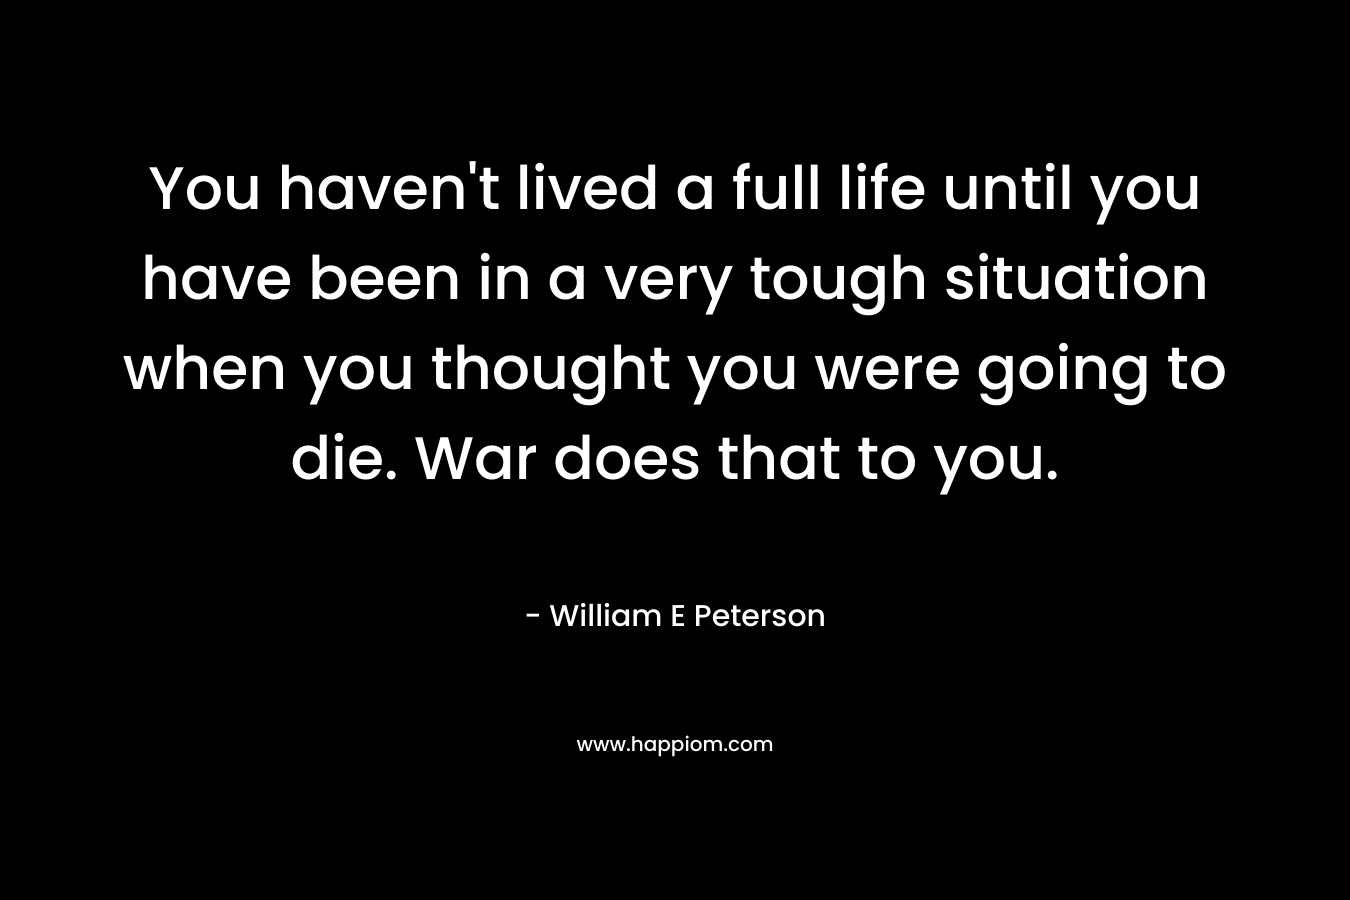 You haven't lived a full life until you have been in a very tough situation when you thought you were going to die. War does that to you.